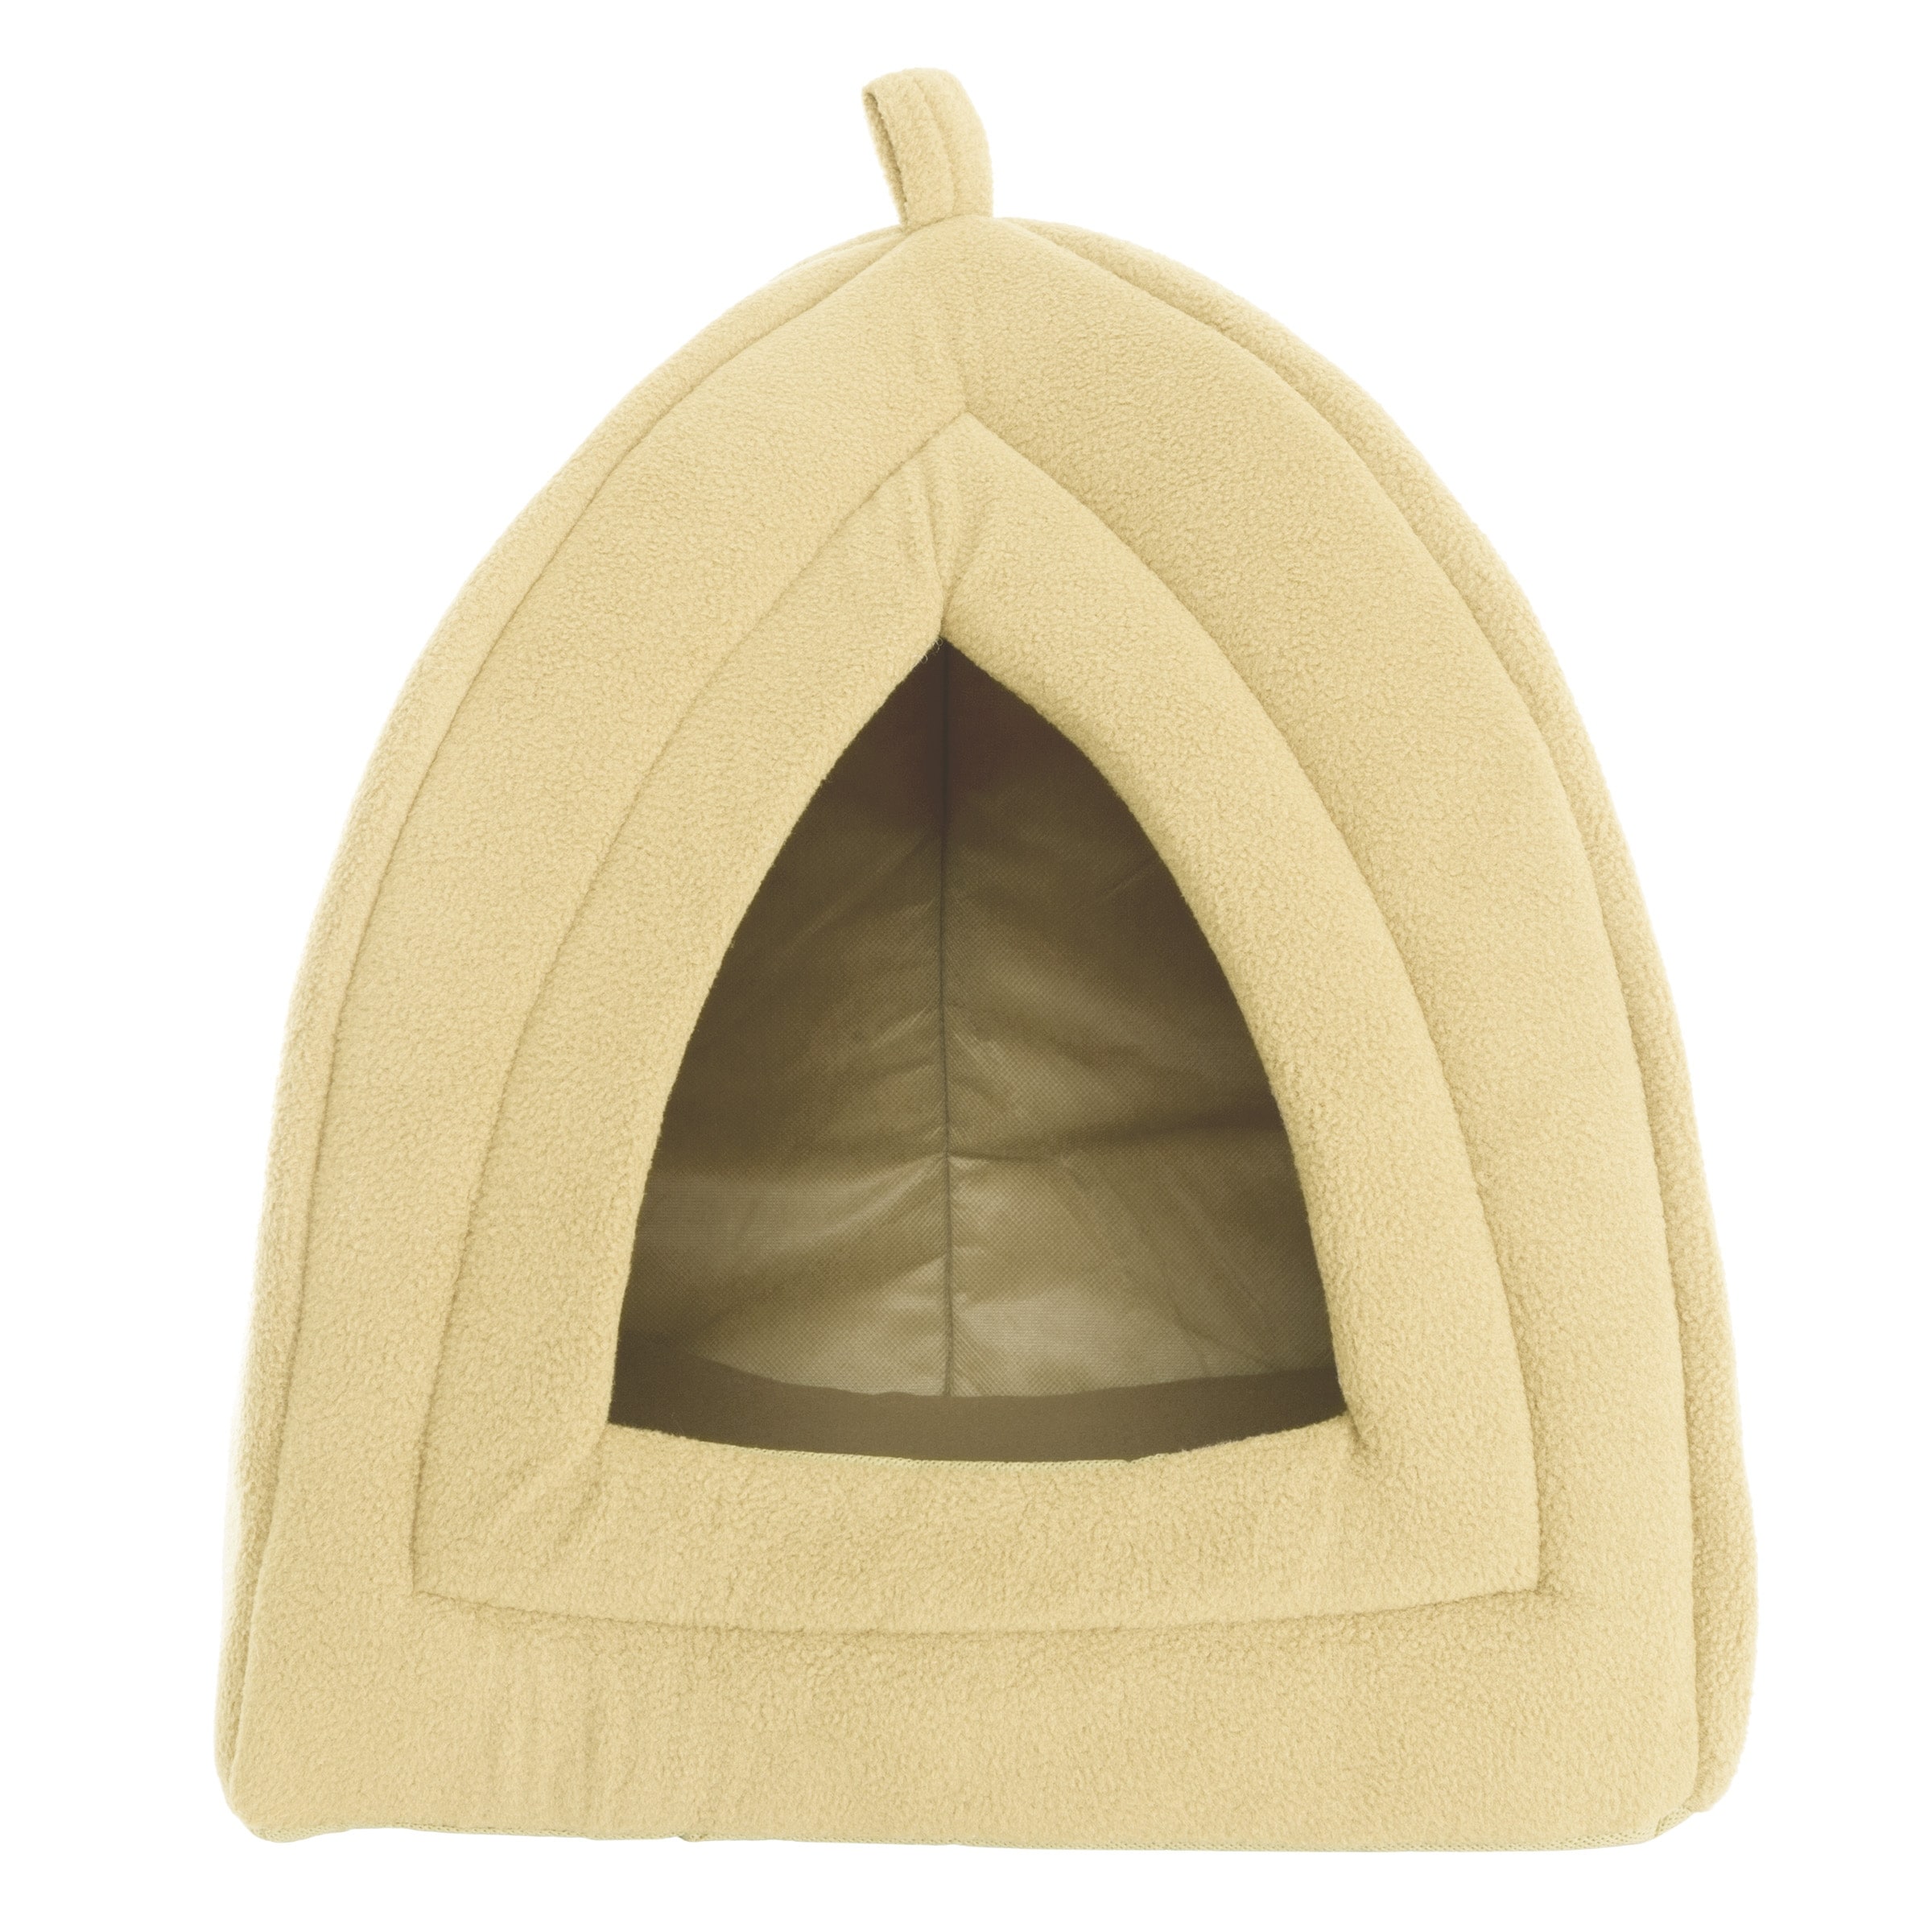 Kitty Pouch™ Cozy Cat Bed – KanaGear